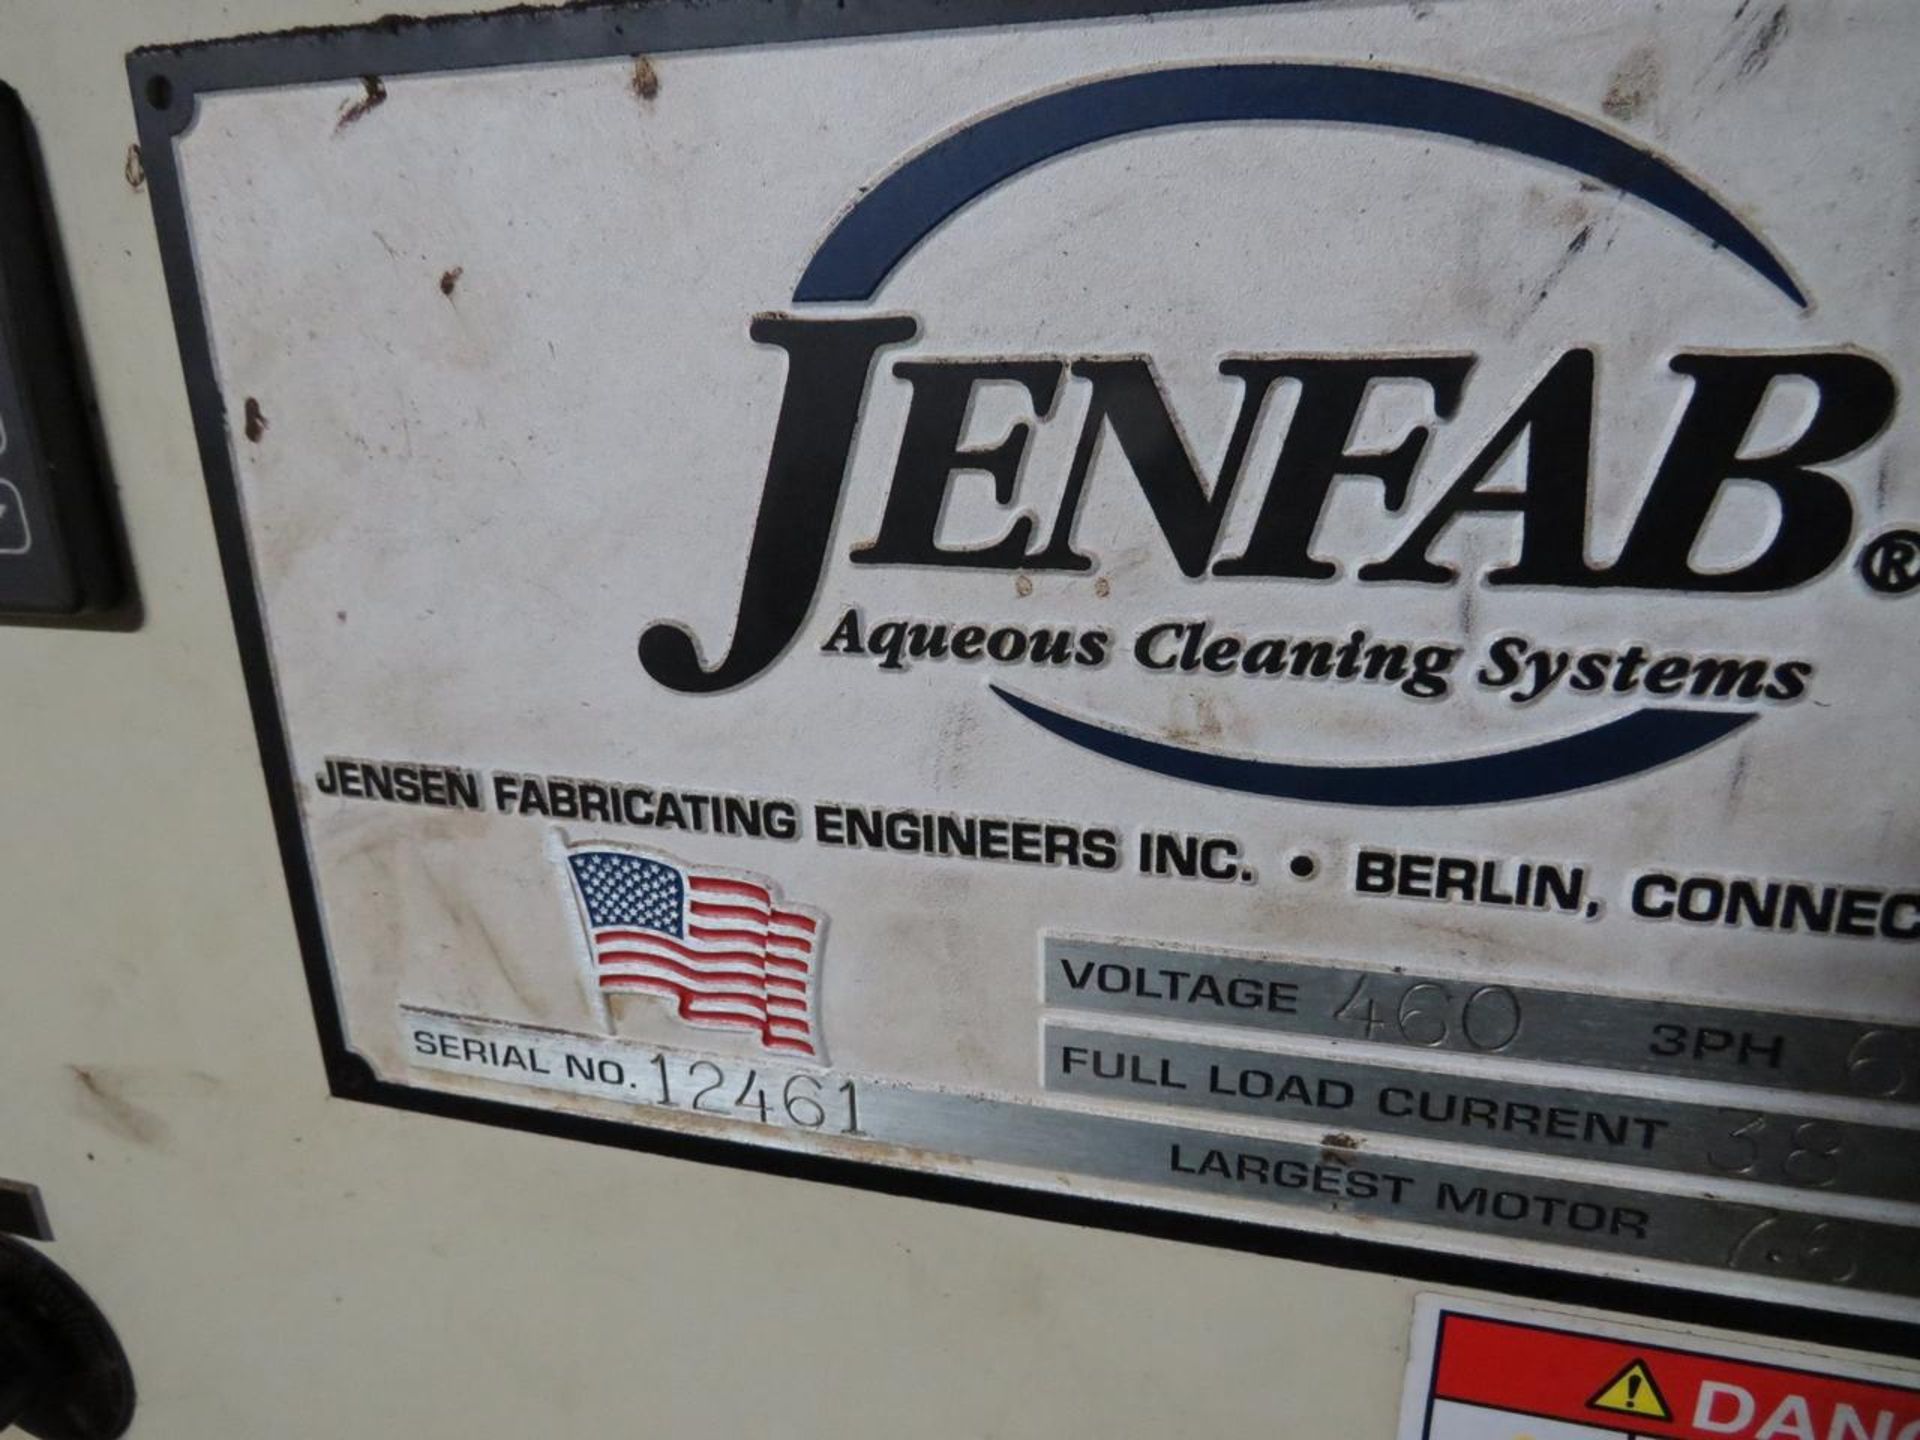 JenFab Aqueous Cleaning System - Image 8 of 11